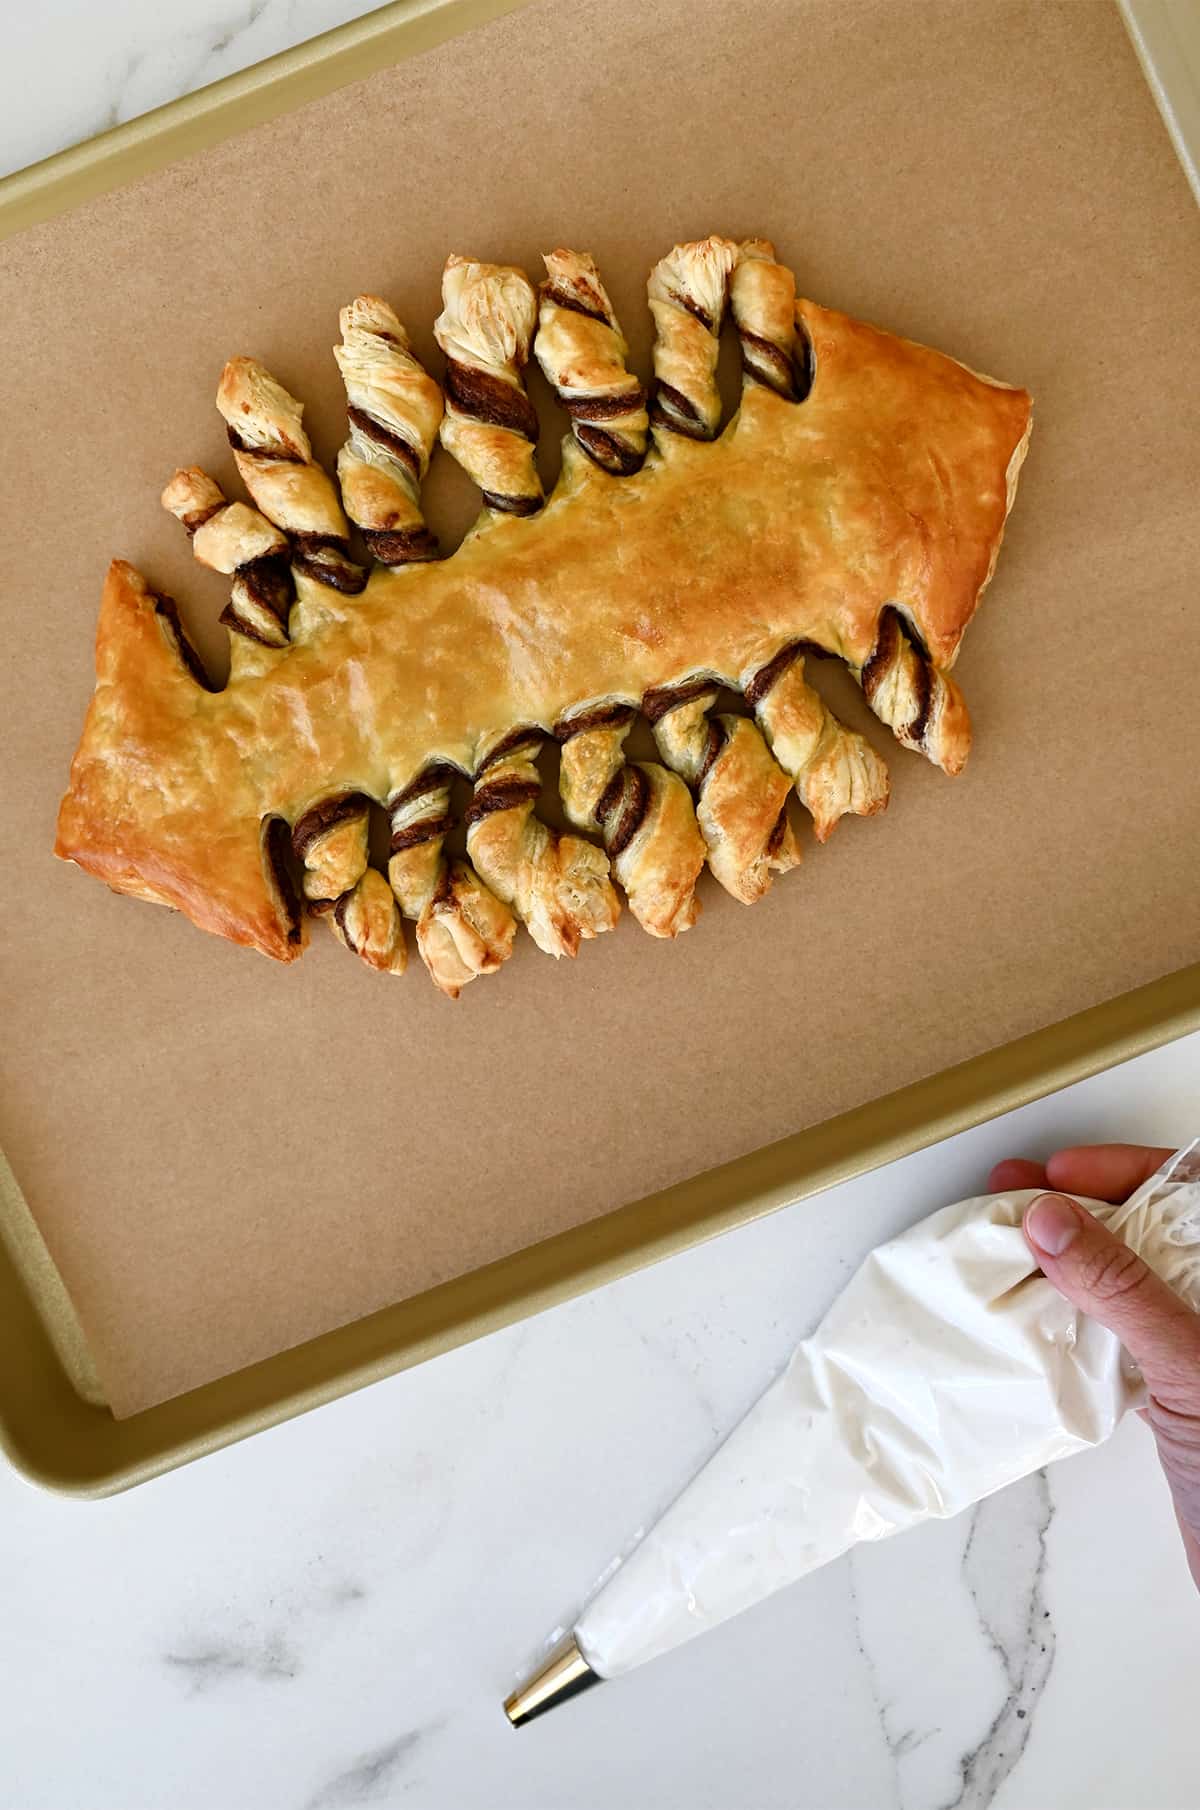 A football-shaped puff pastry with Nutella filling on a parchment paper-lined baking sheet next to a piping bag with vanilla frosting.